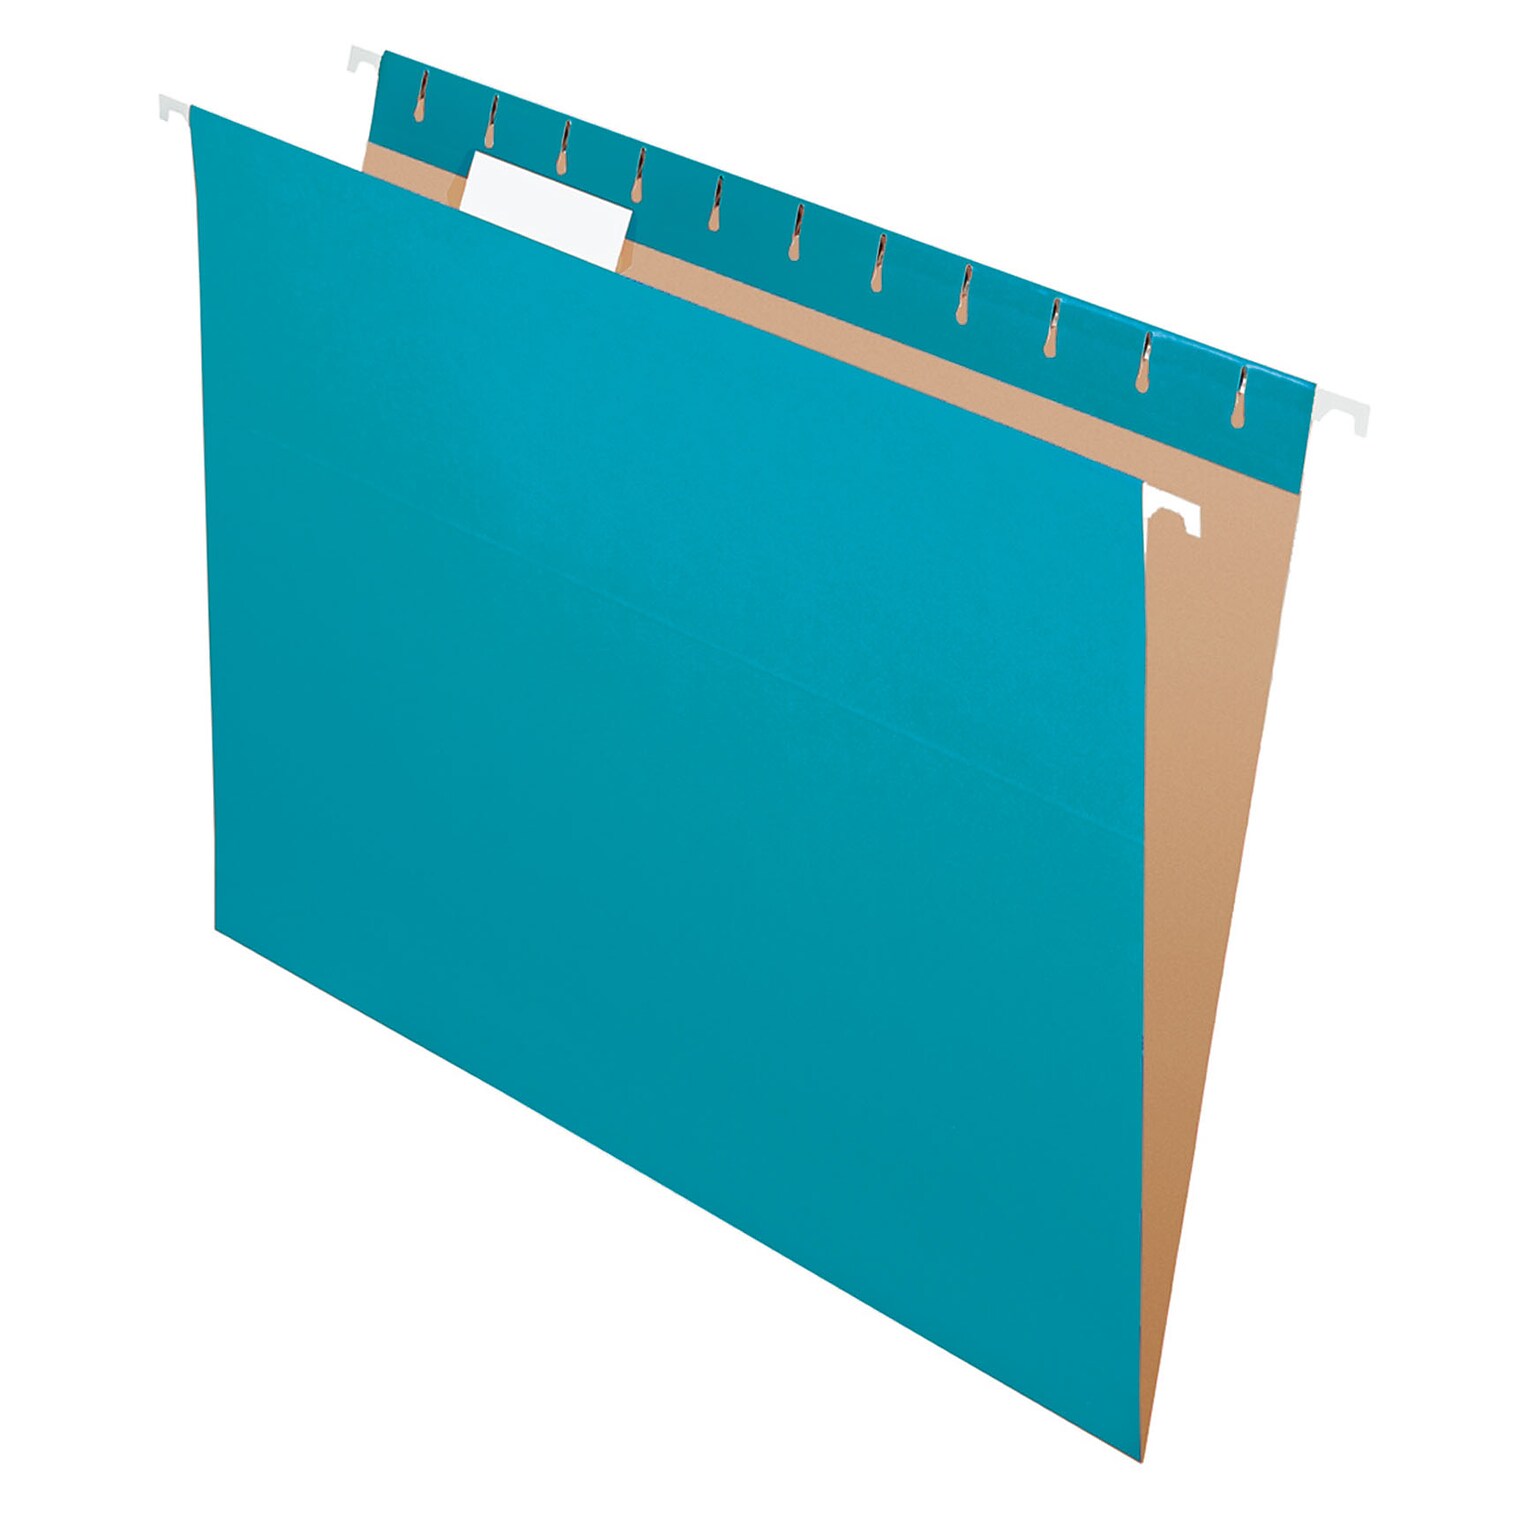 Pendaflex Recycled Hanging File Folders, 1/5 Tab, Letter Size, Teal, 25/Box (81614)